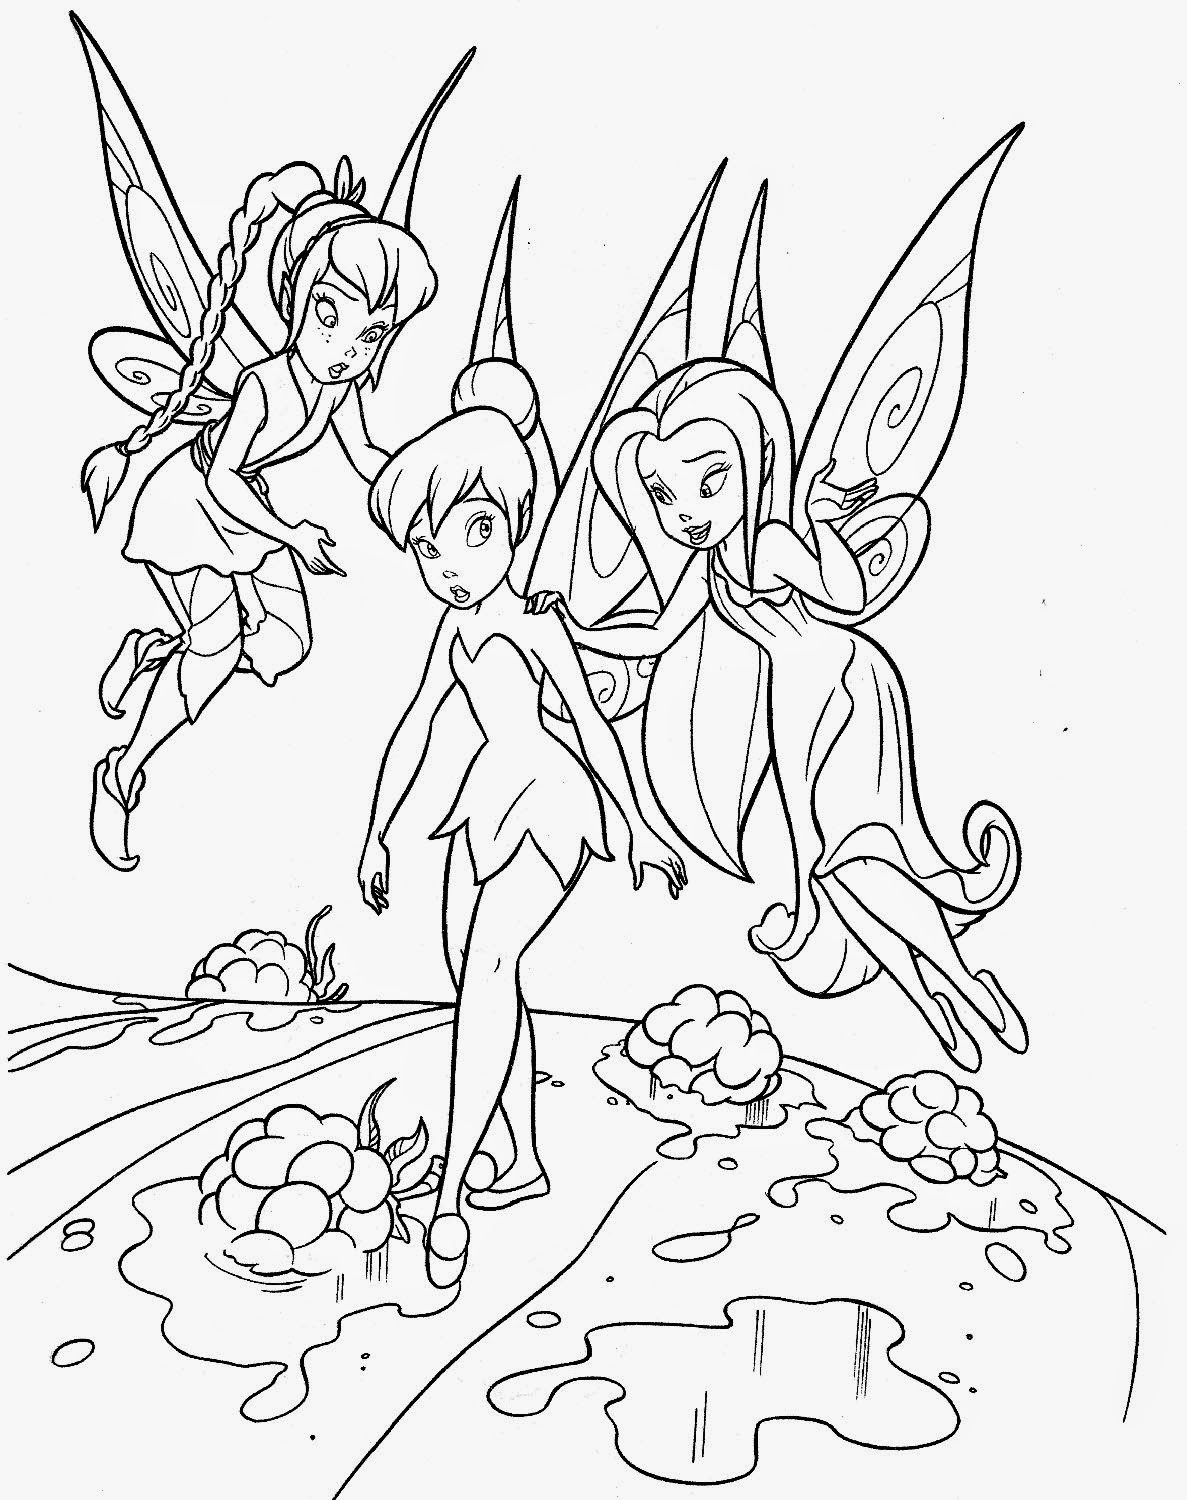 Tinker Bell Printable Coloring Pages
 FUN & LEARN Free worksheets for kid ภาพระบายสี ทิงเกอร